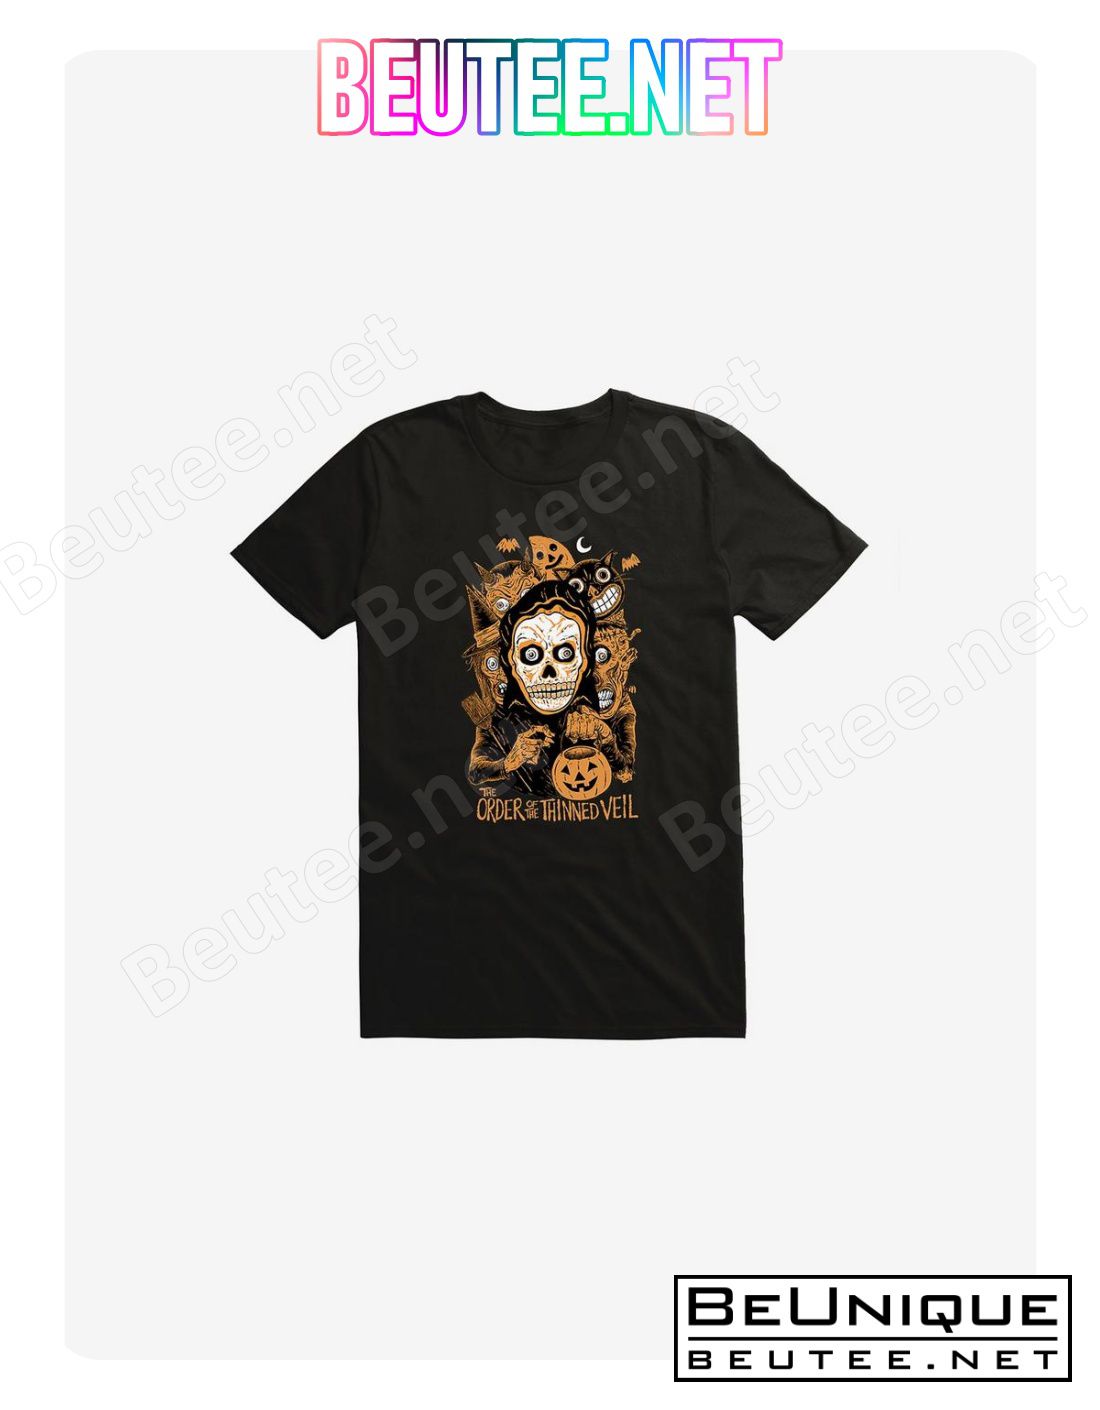 Order of the Thinned Veil 'Trick-Or-Creep' T-Shirt